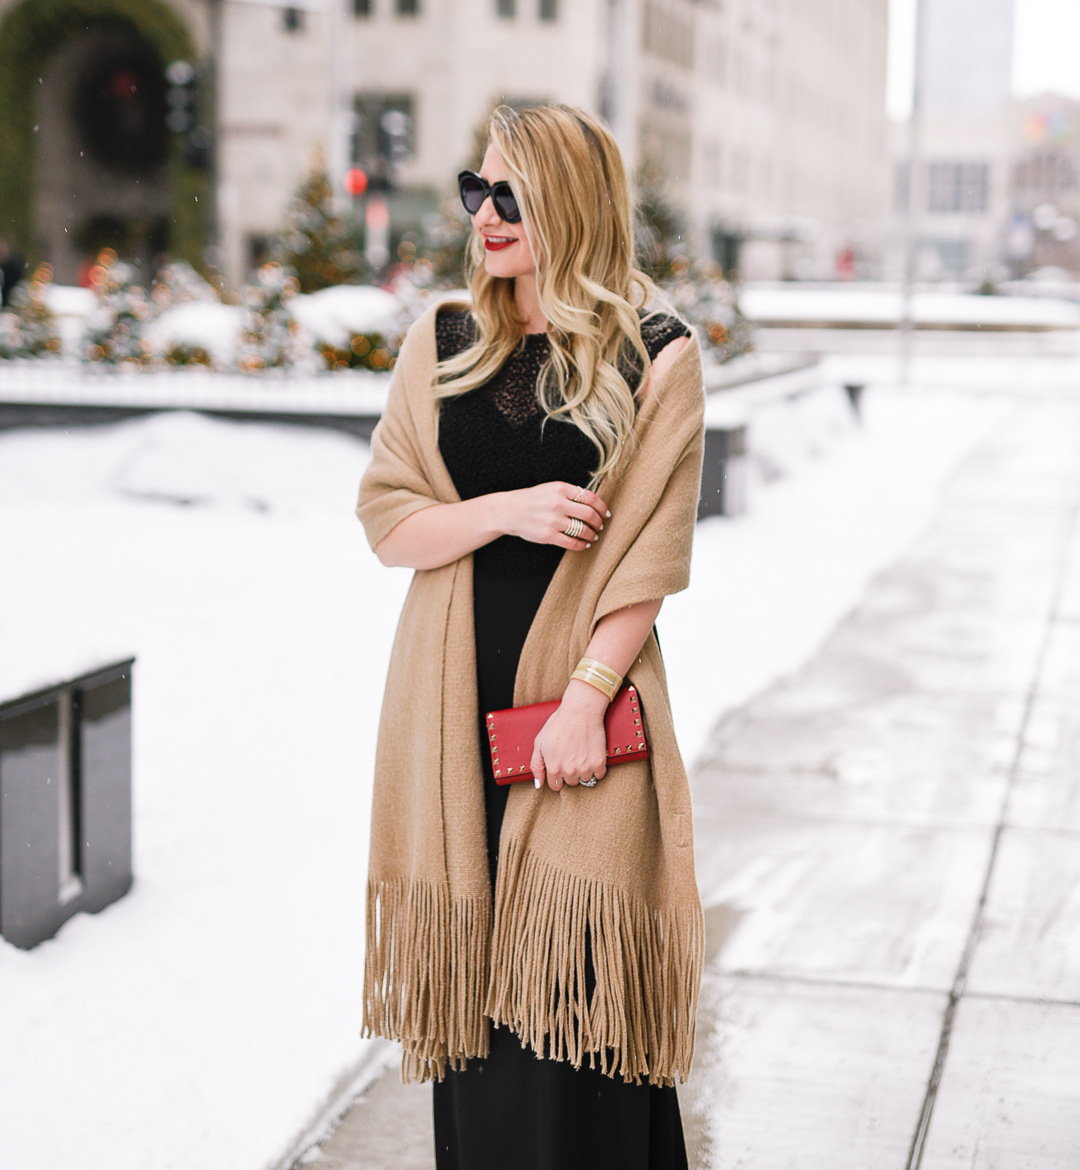 Jenna Colgrove wearing an Alyce Paris maxi dress and fringe beige colored scarf. 